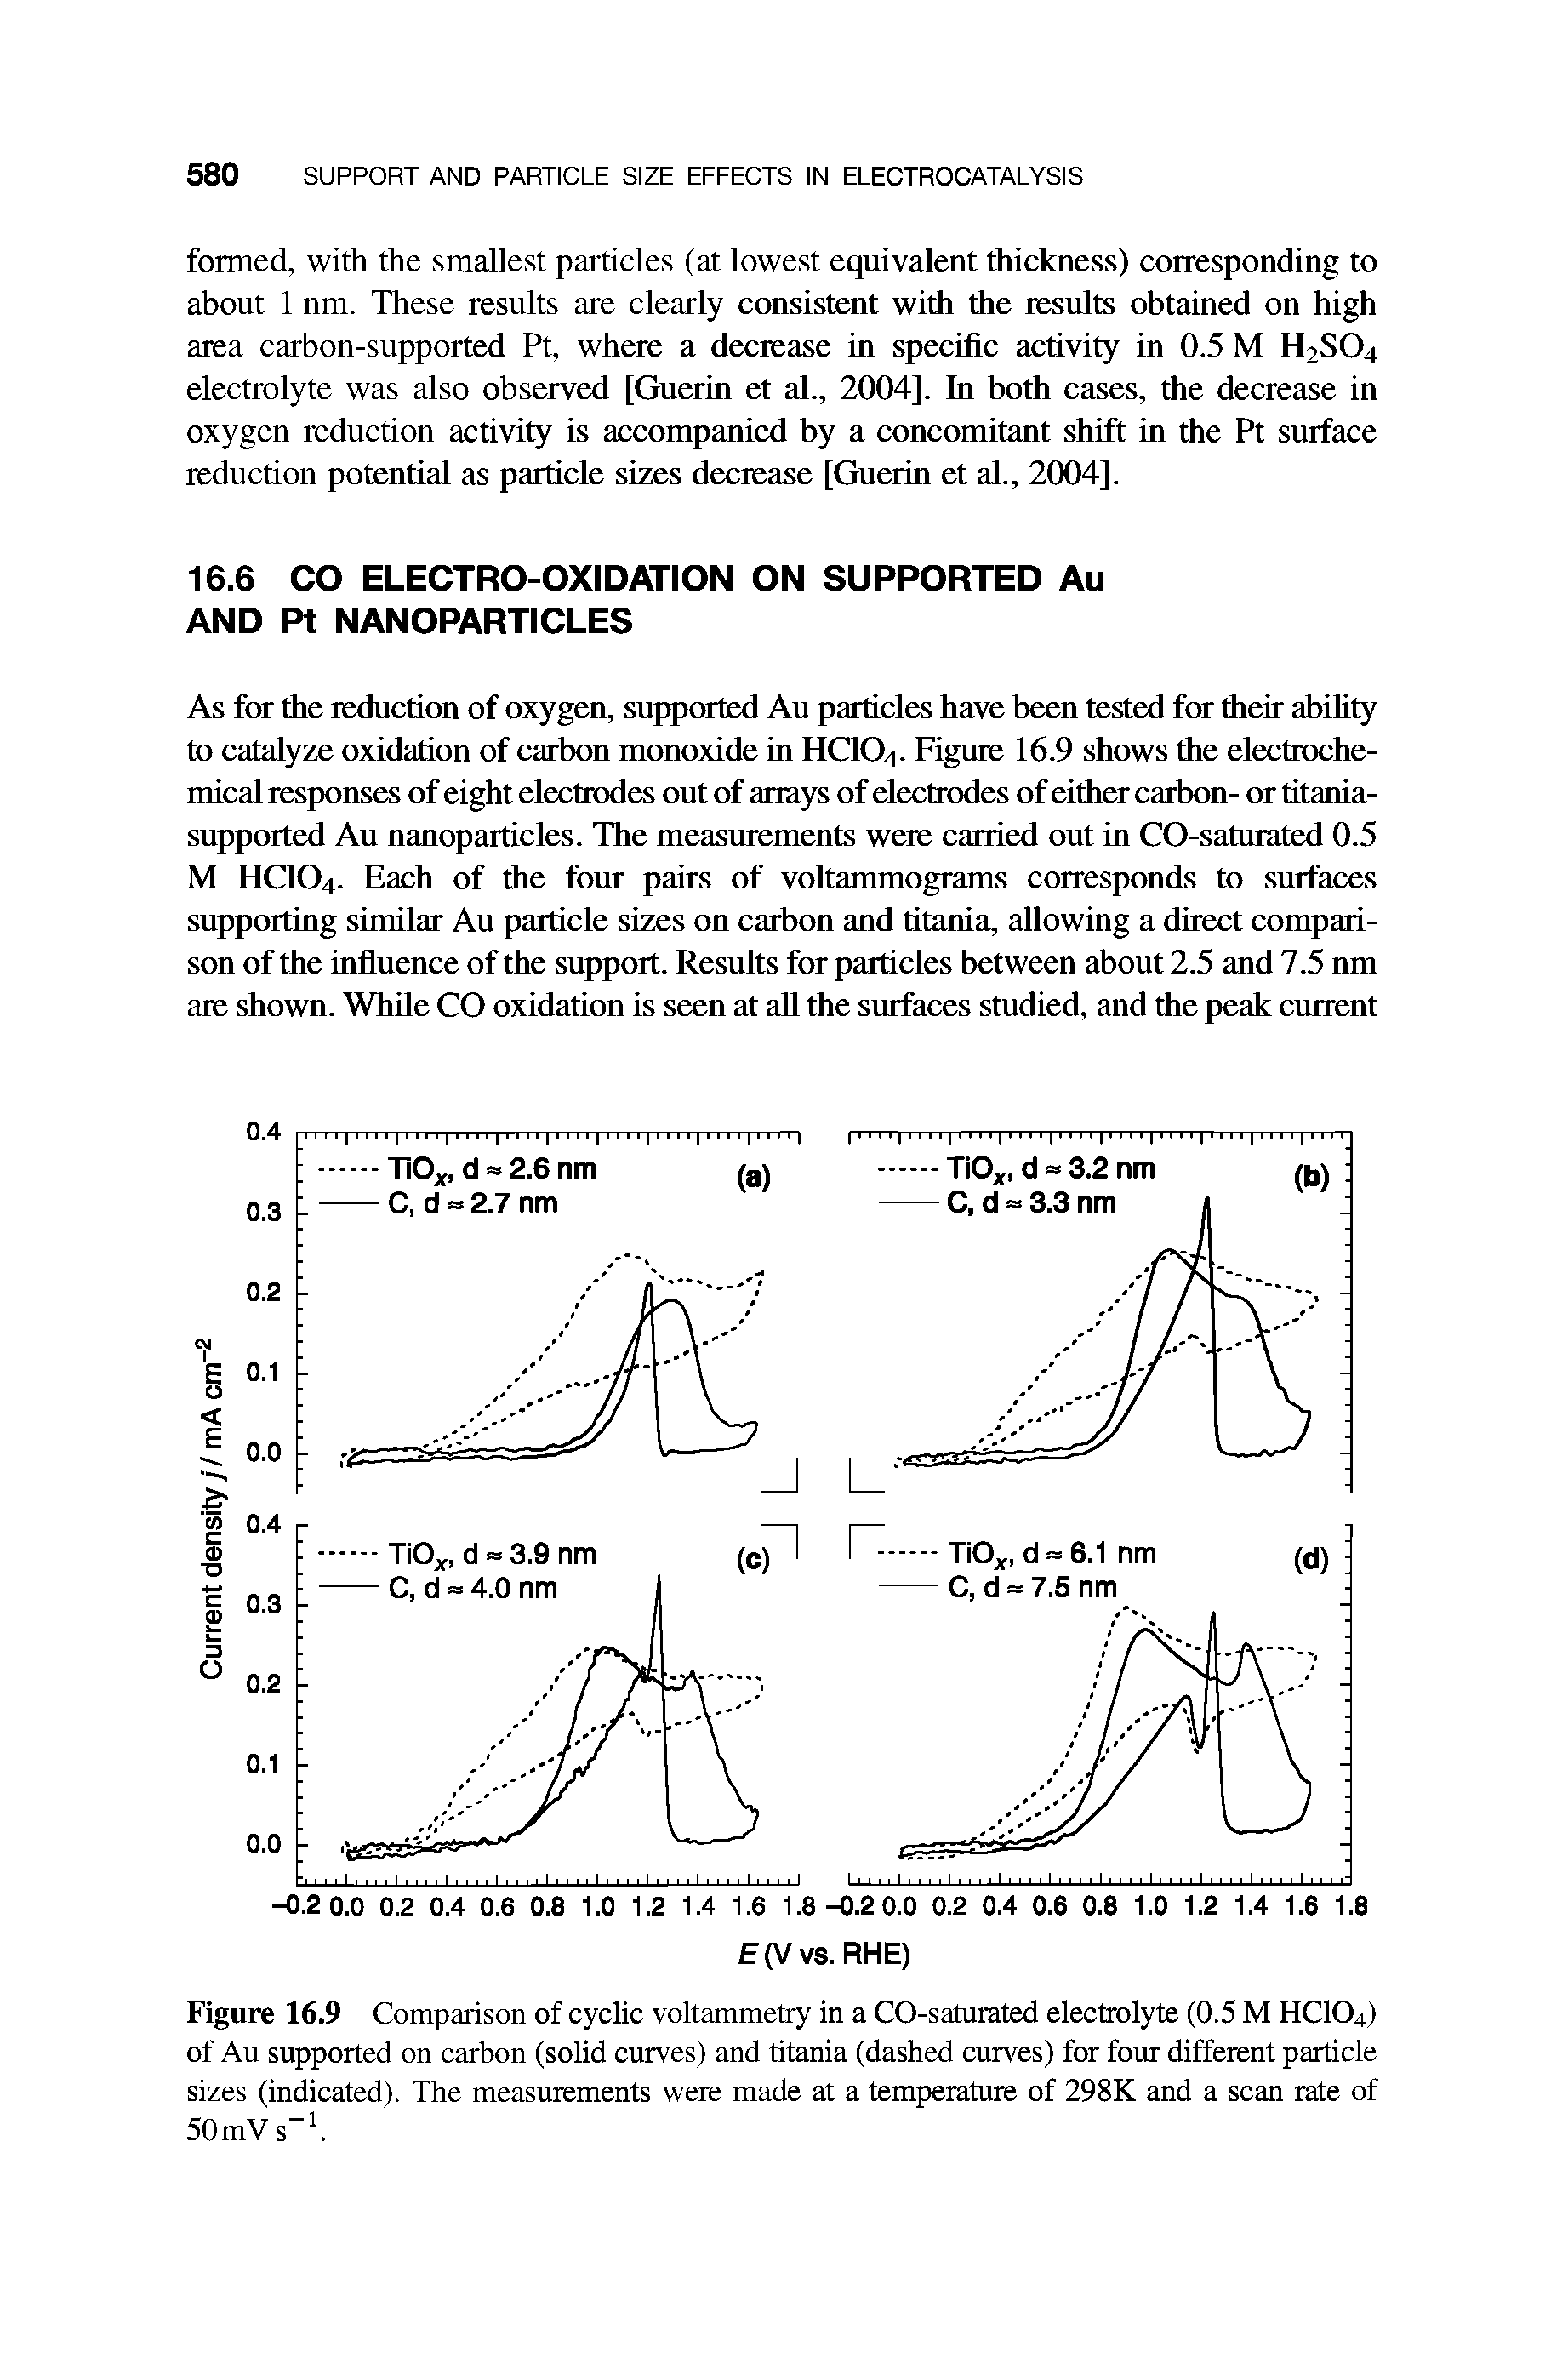 Figure 16.9 Comparison of cyclic voltammetry in a CO-saturated electrolyte (0.5 M HCIO4) of Au supported on carbon (solid curves) and titania (dashed curves) for four different particle sizes (indicated). The measurements were made at a temperature of 298K and a scan rate of 50mV s ...